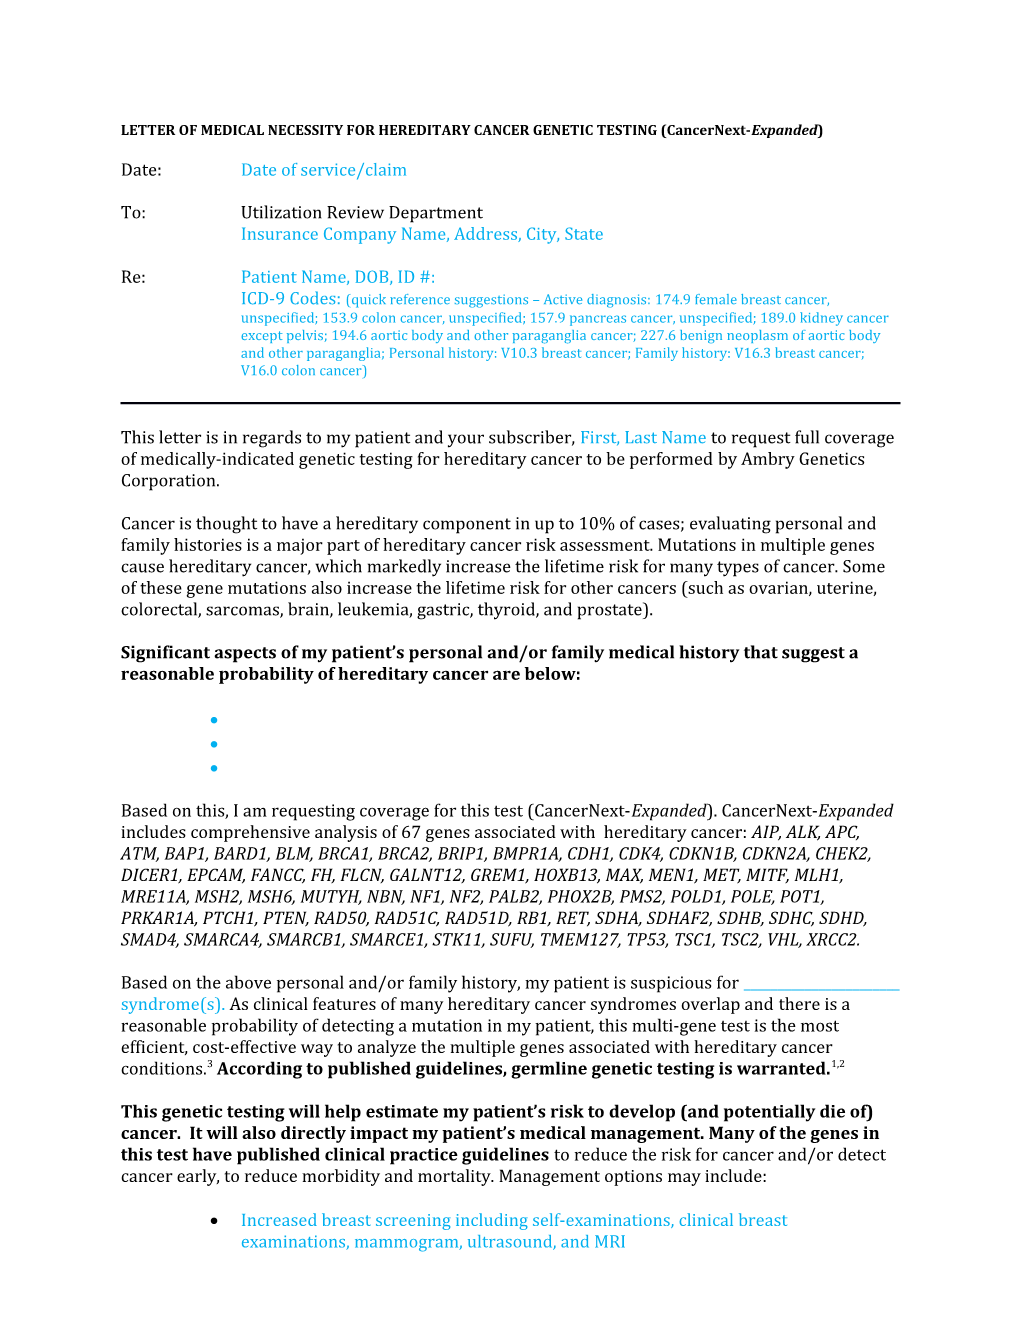 LETTER of MEDICAL NECESSITY for HEREDITARY CANCER GENETIC TESTING (Cancernext-Expanded)